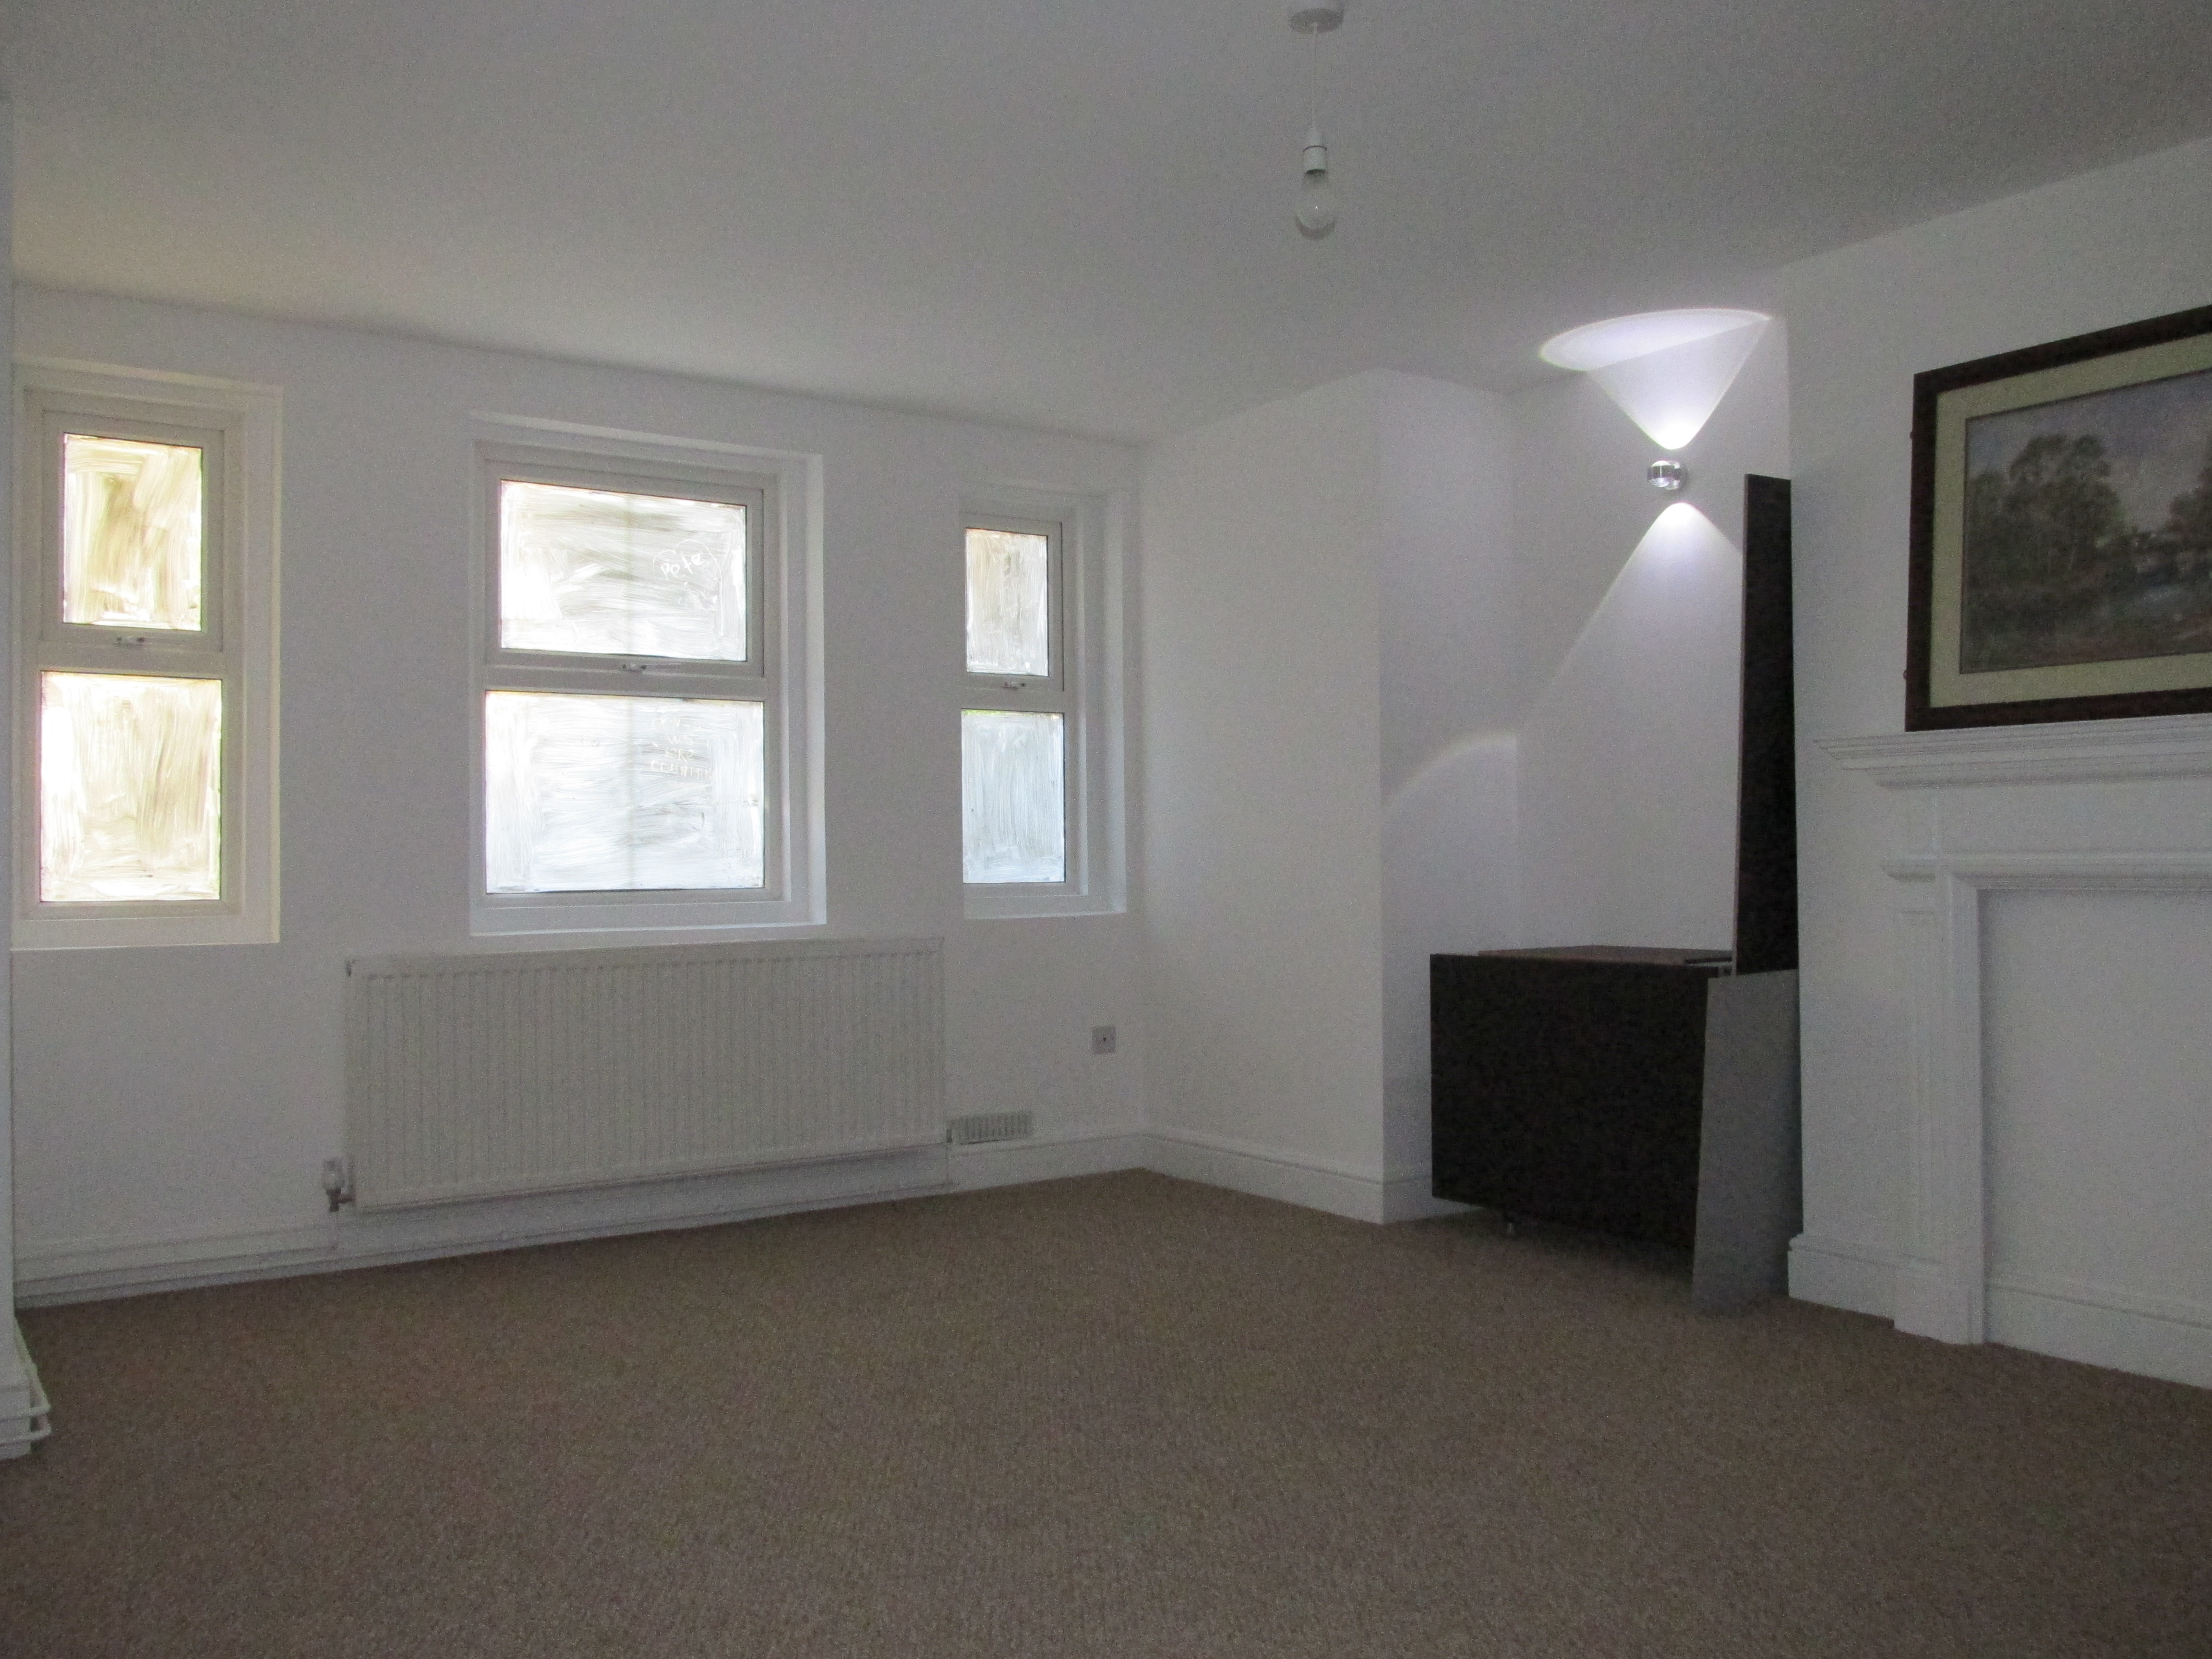 A spacious 3 bedroom flat to let situated trendy Stoke Newington N16.